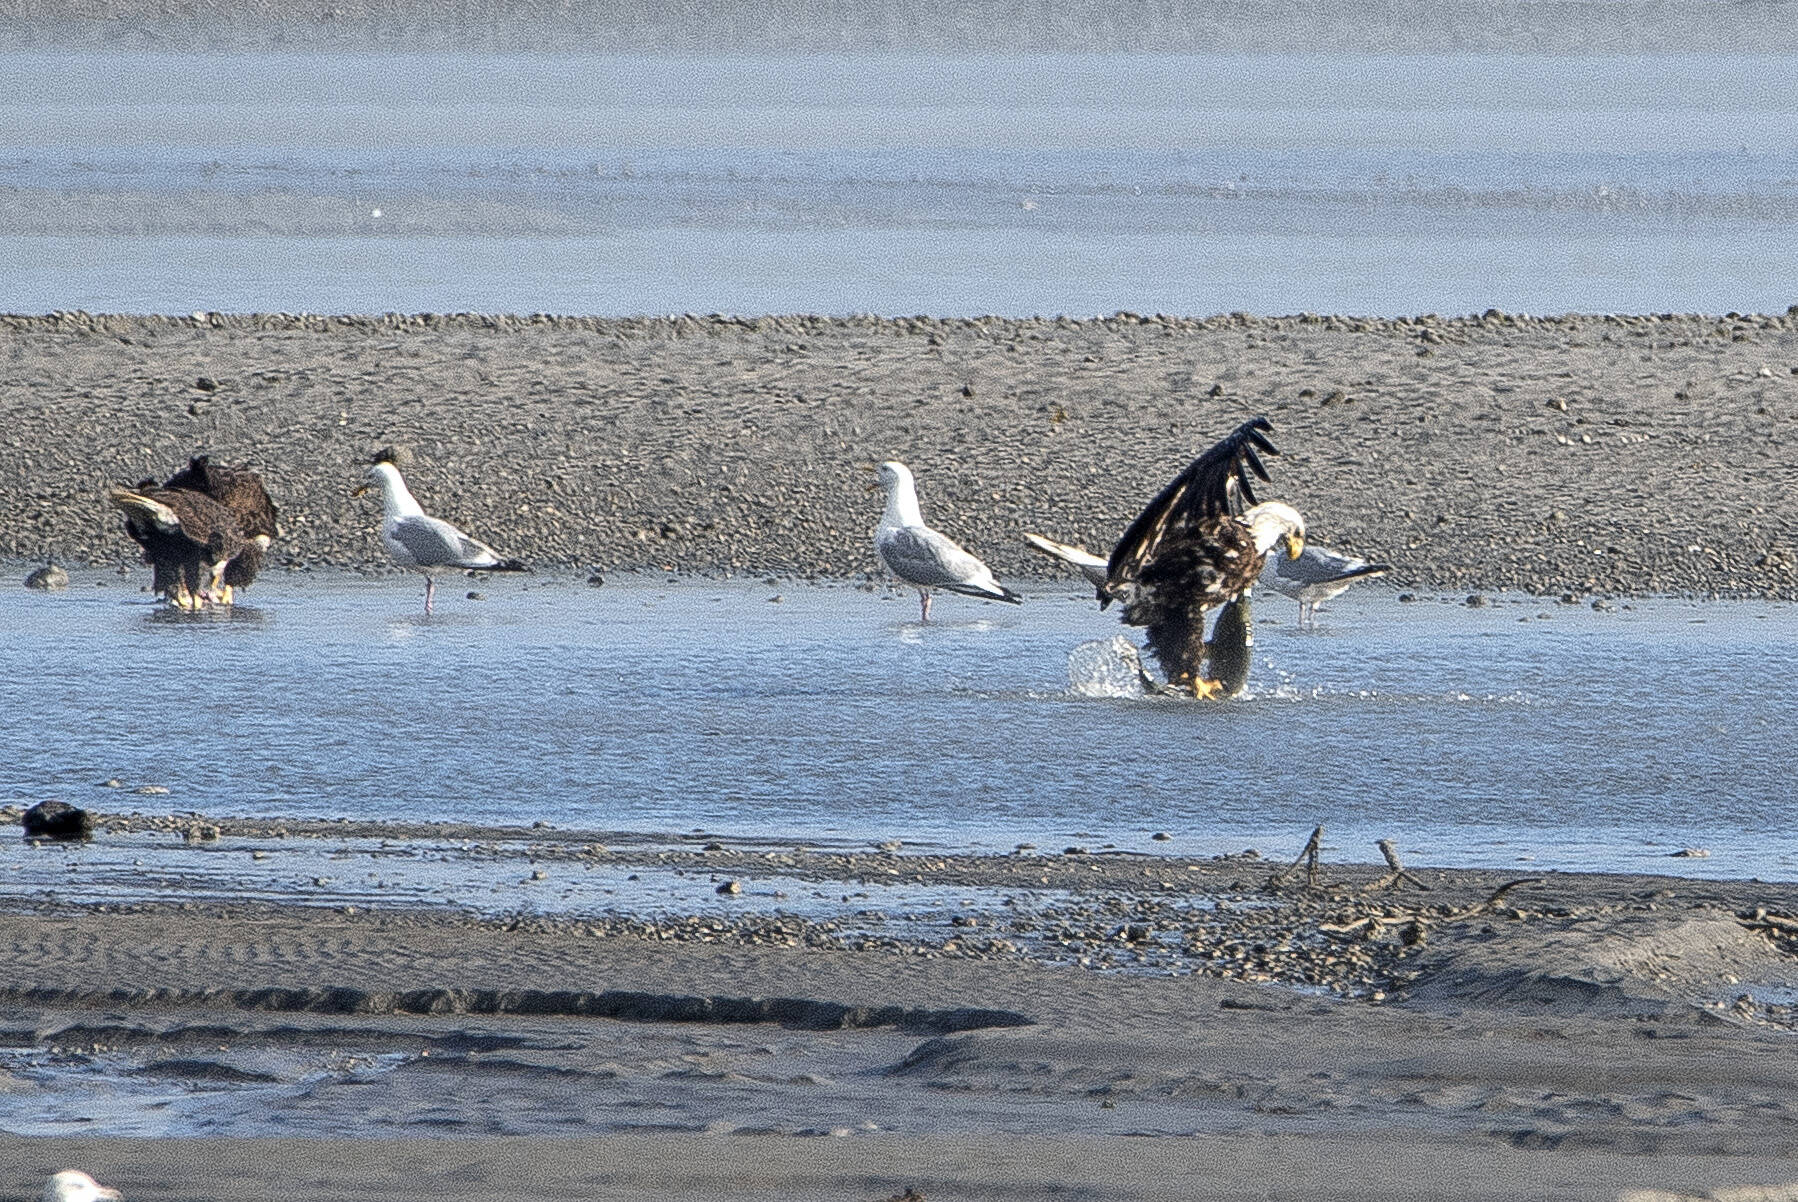 Bald eagles subduing chum salmon with gulls in attendance. (Courtesy Photo / Kenneth Gill, gillfoto)